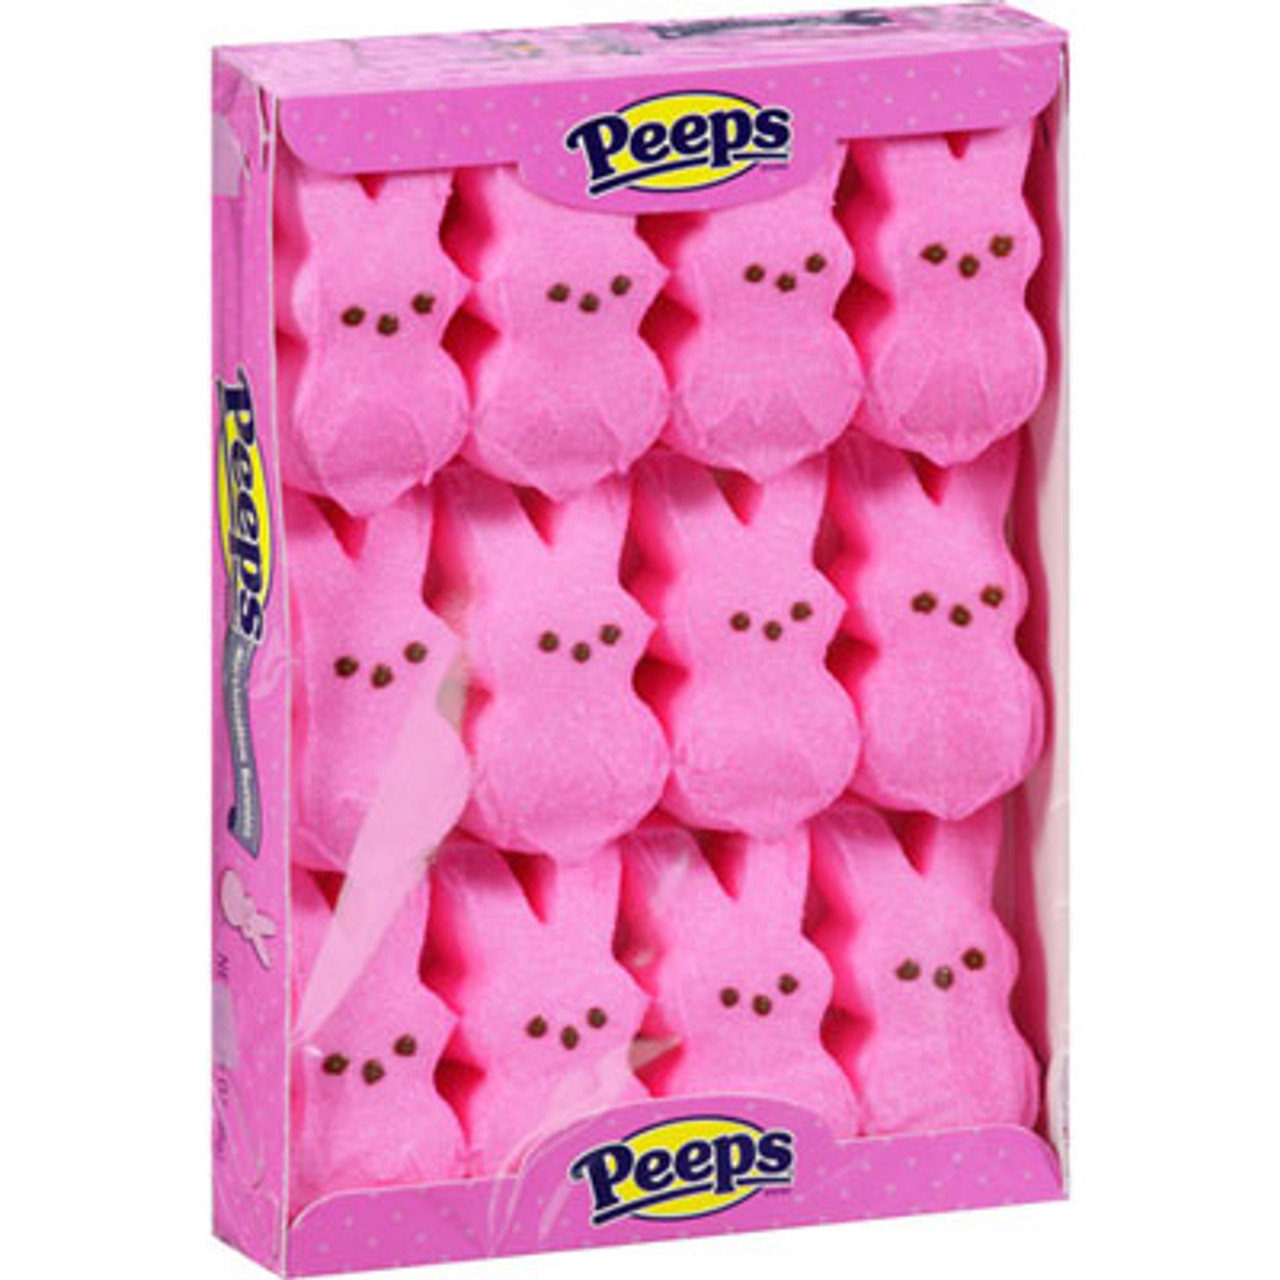 https://cdn11.bigcommerce.com/s-omwfd2x16c/images/stencil/1280x1280/products/7383/8272/marshmallow-peeps-bunnies-12ct-pink-36__60182.1623946390.jpg?c=1